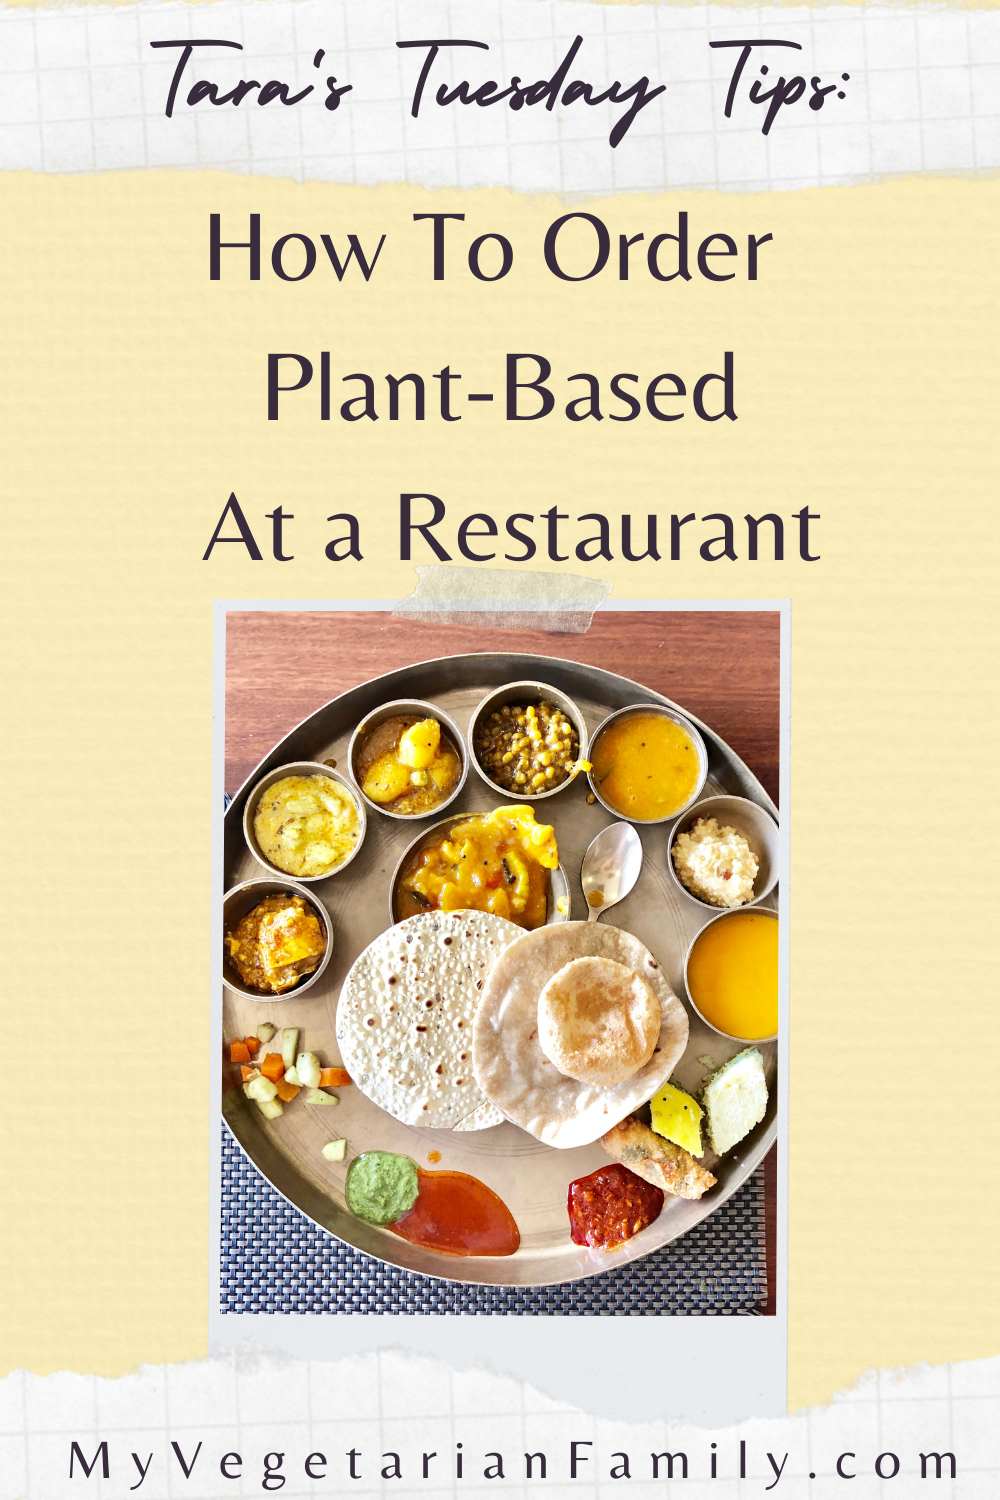 How To Order Plant-Based At a Restaurant | Tara's Tuesday Tips | My Vegetarian Family #plantbasedtips #nutritiontips #veganeatingout